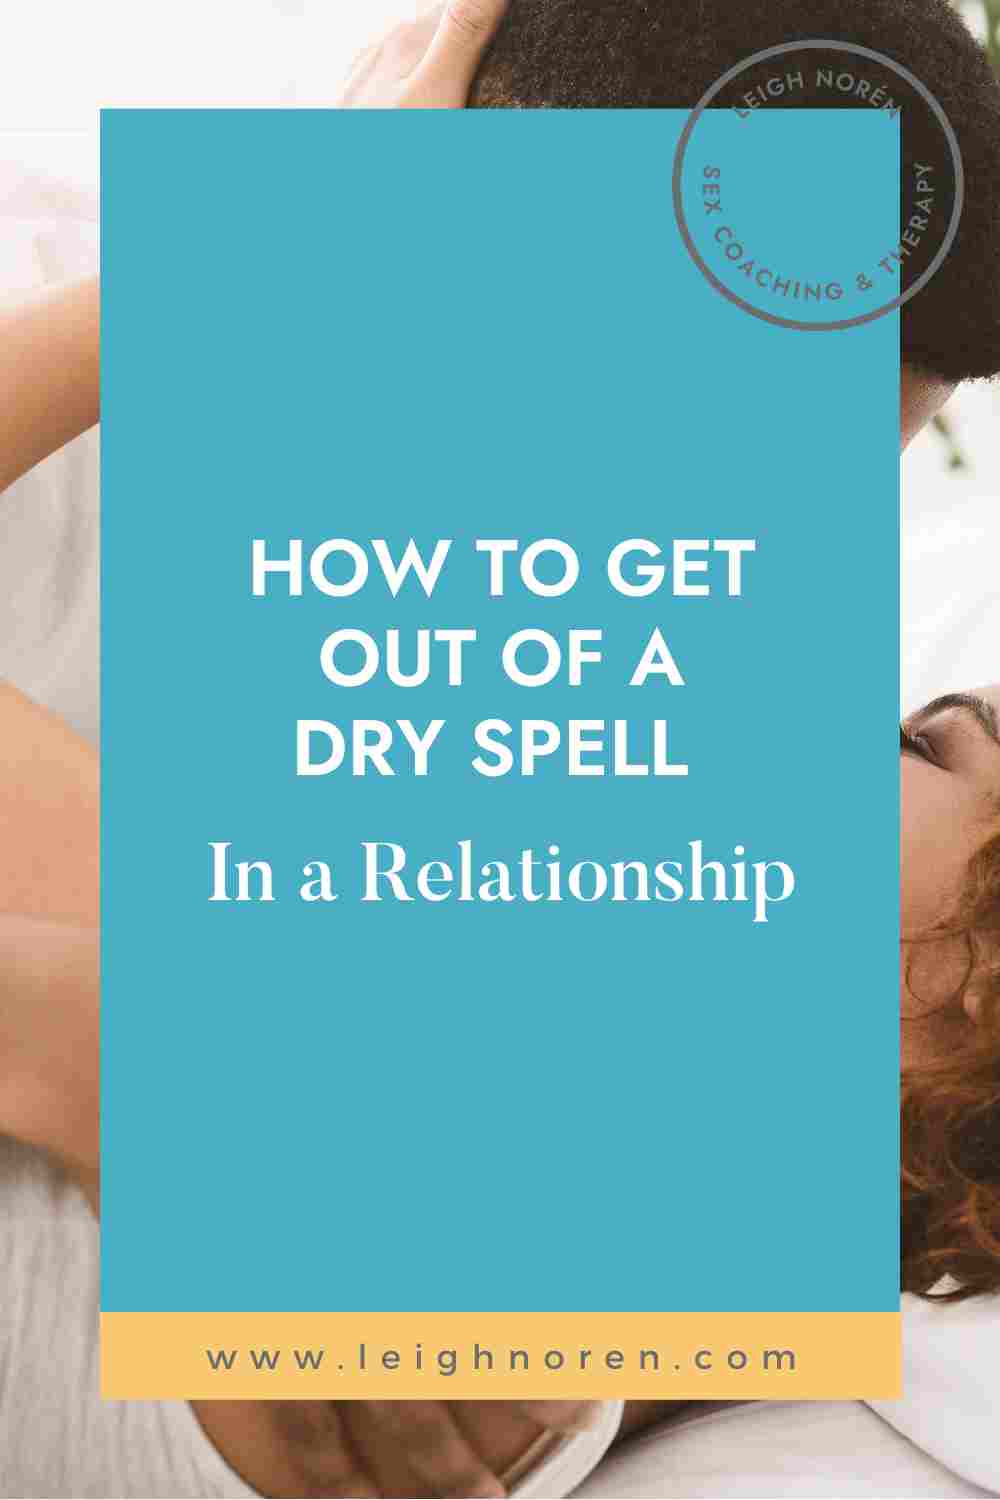 How to get out of a dry spell in a relationship